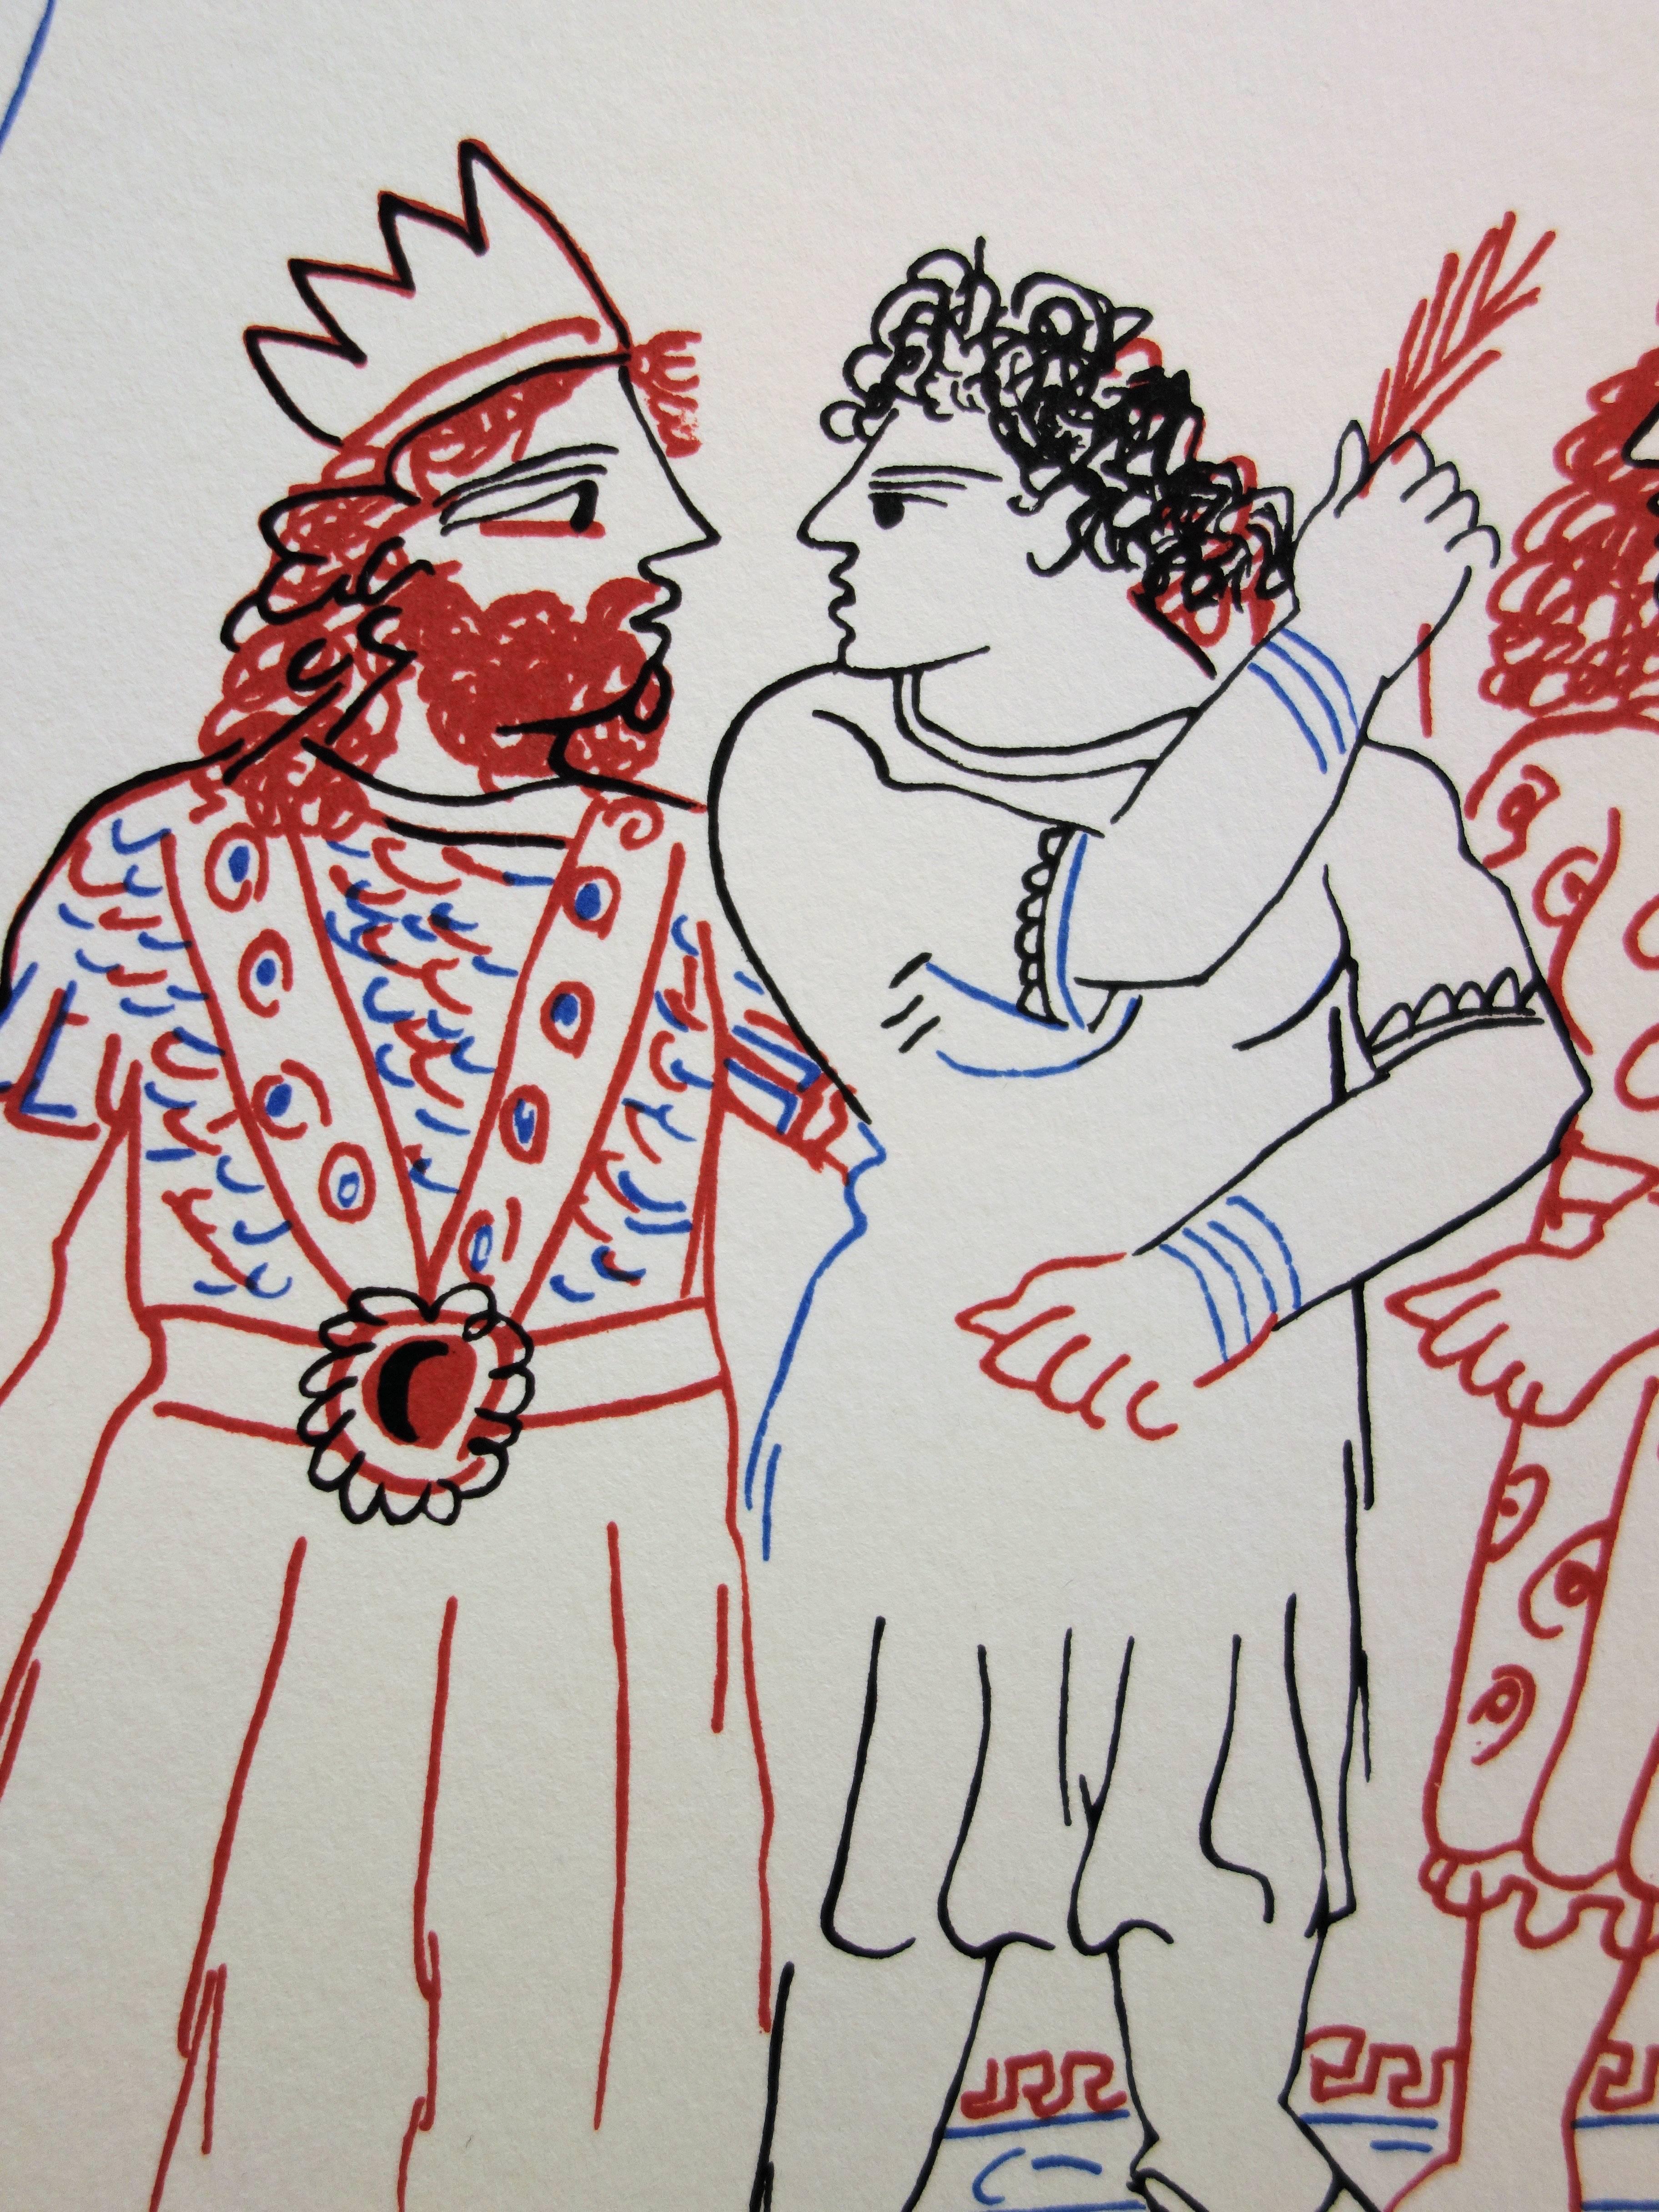 Mythology : King and Greek Couple - Original handsigned lithograph /99ex - Modern Print by Alekos Fassianos